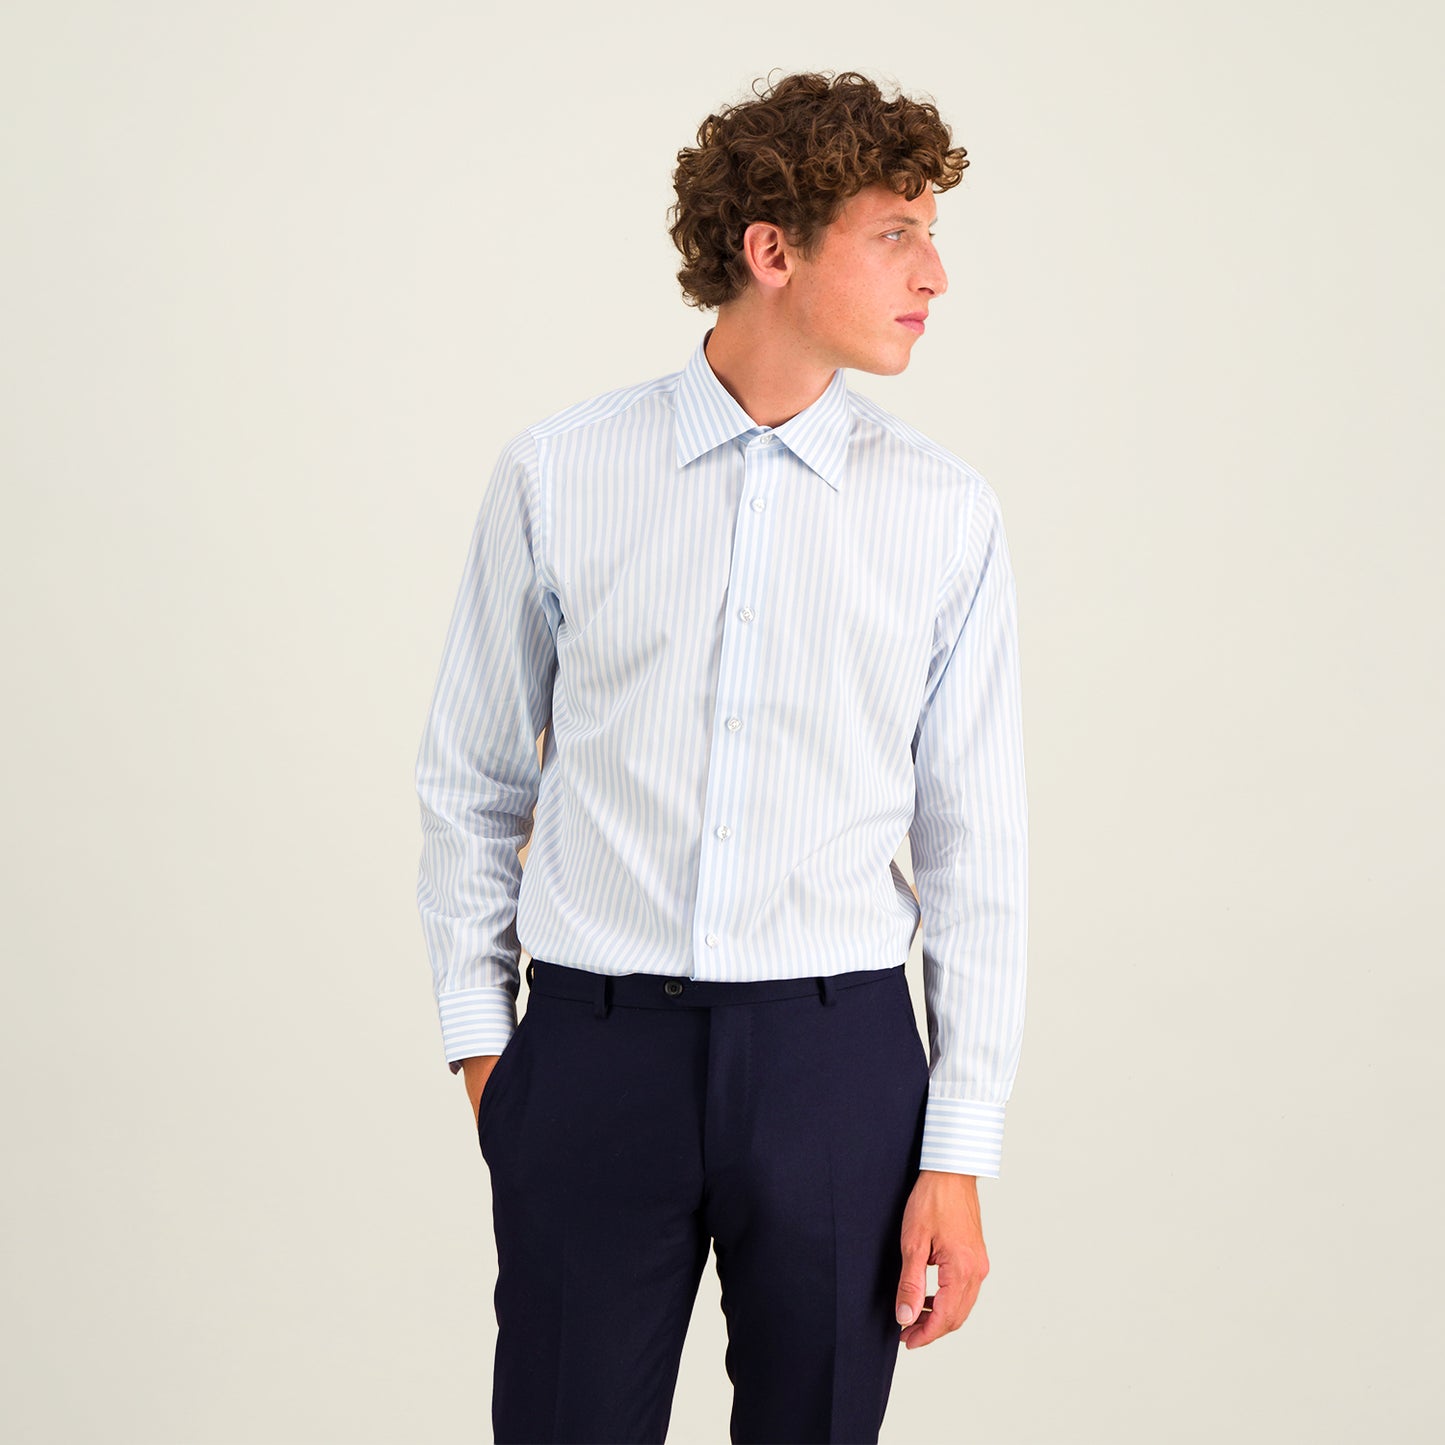 Double-twisted poplin shirt with sky blue and white stripes